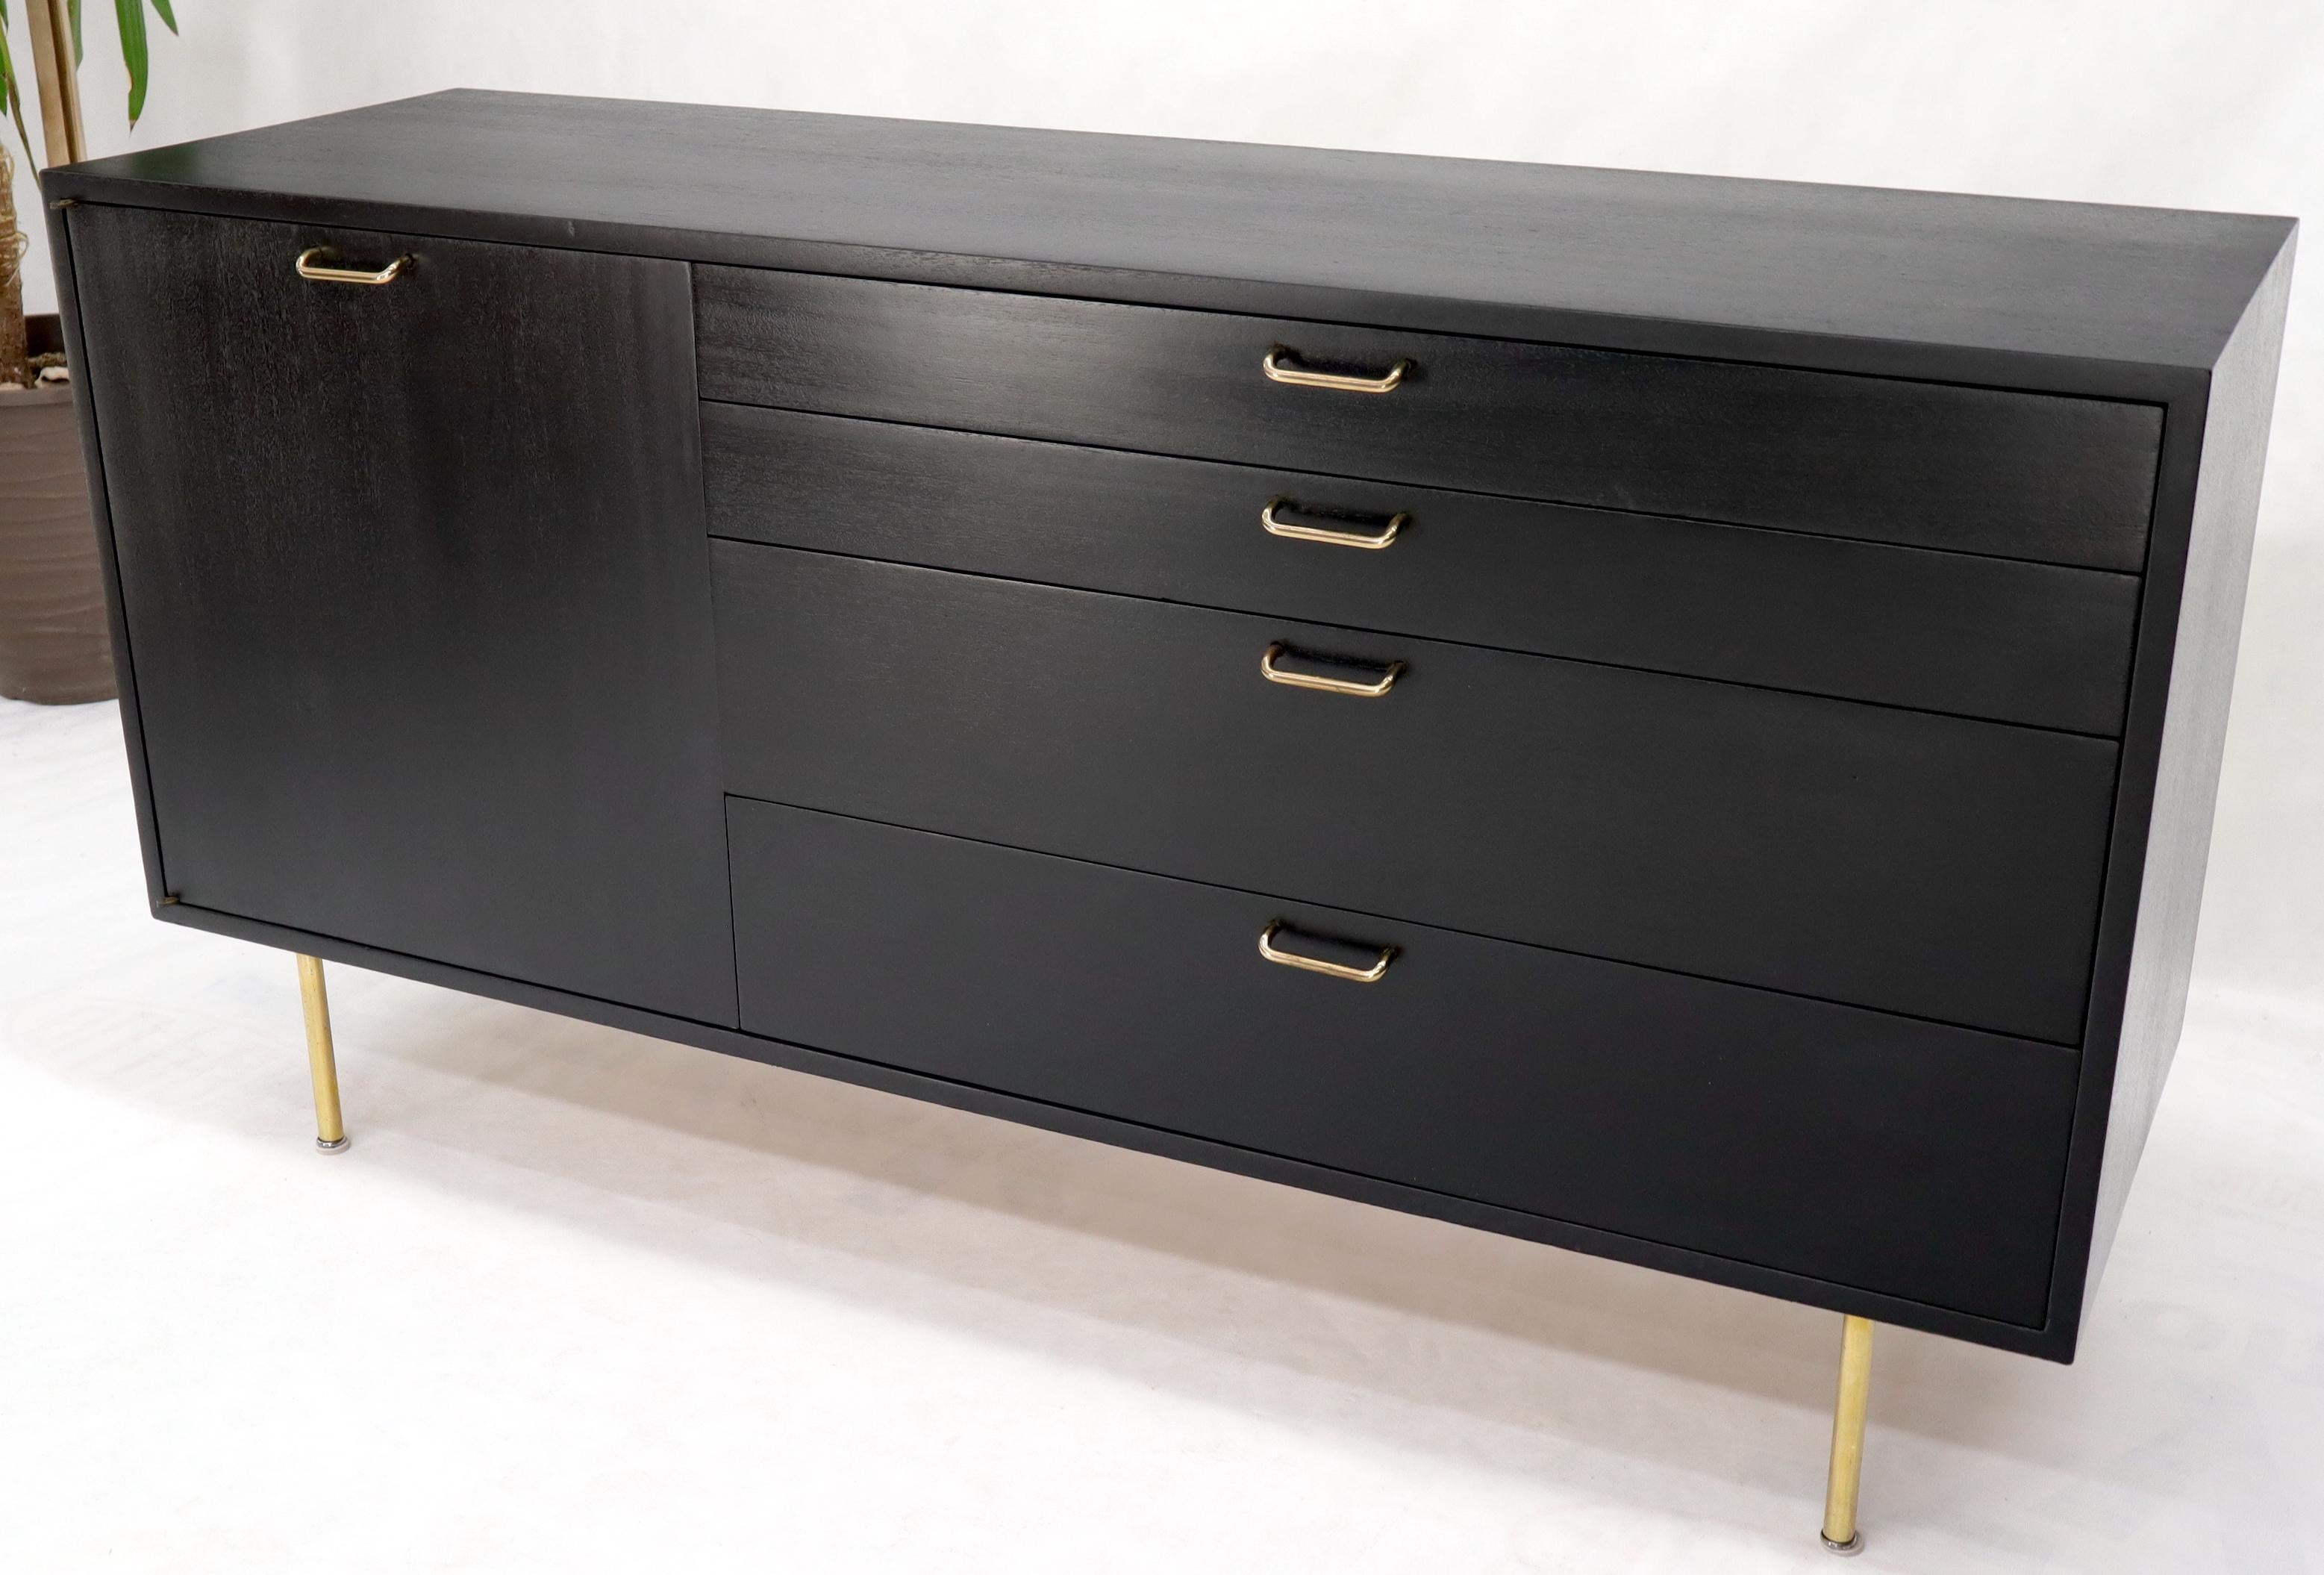 20th Century Harvey Probber Black Lacquer Brass Hardware and Legs 4 Drawers Credenza